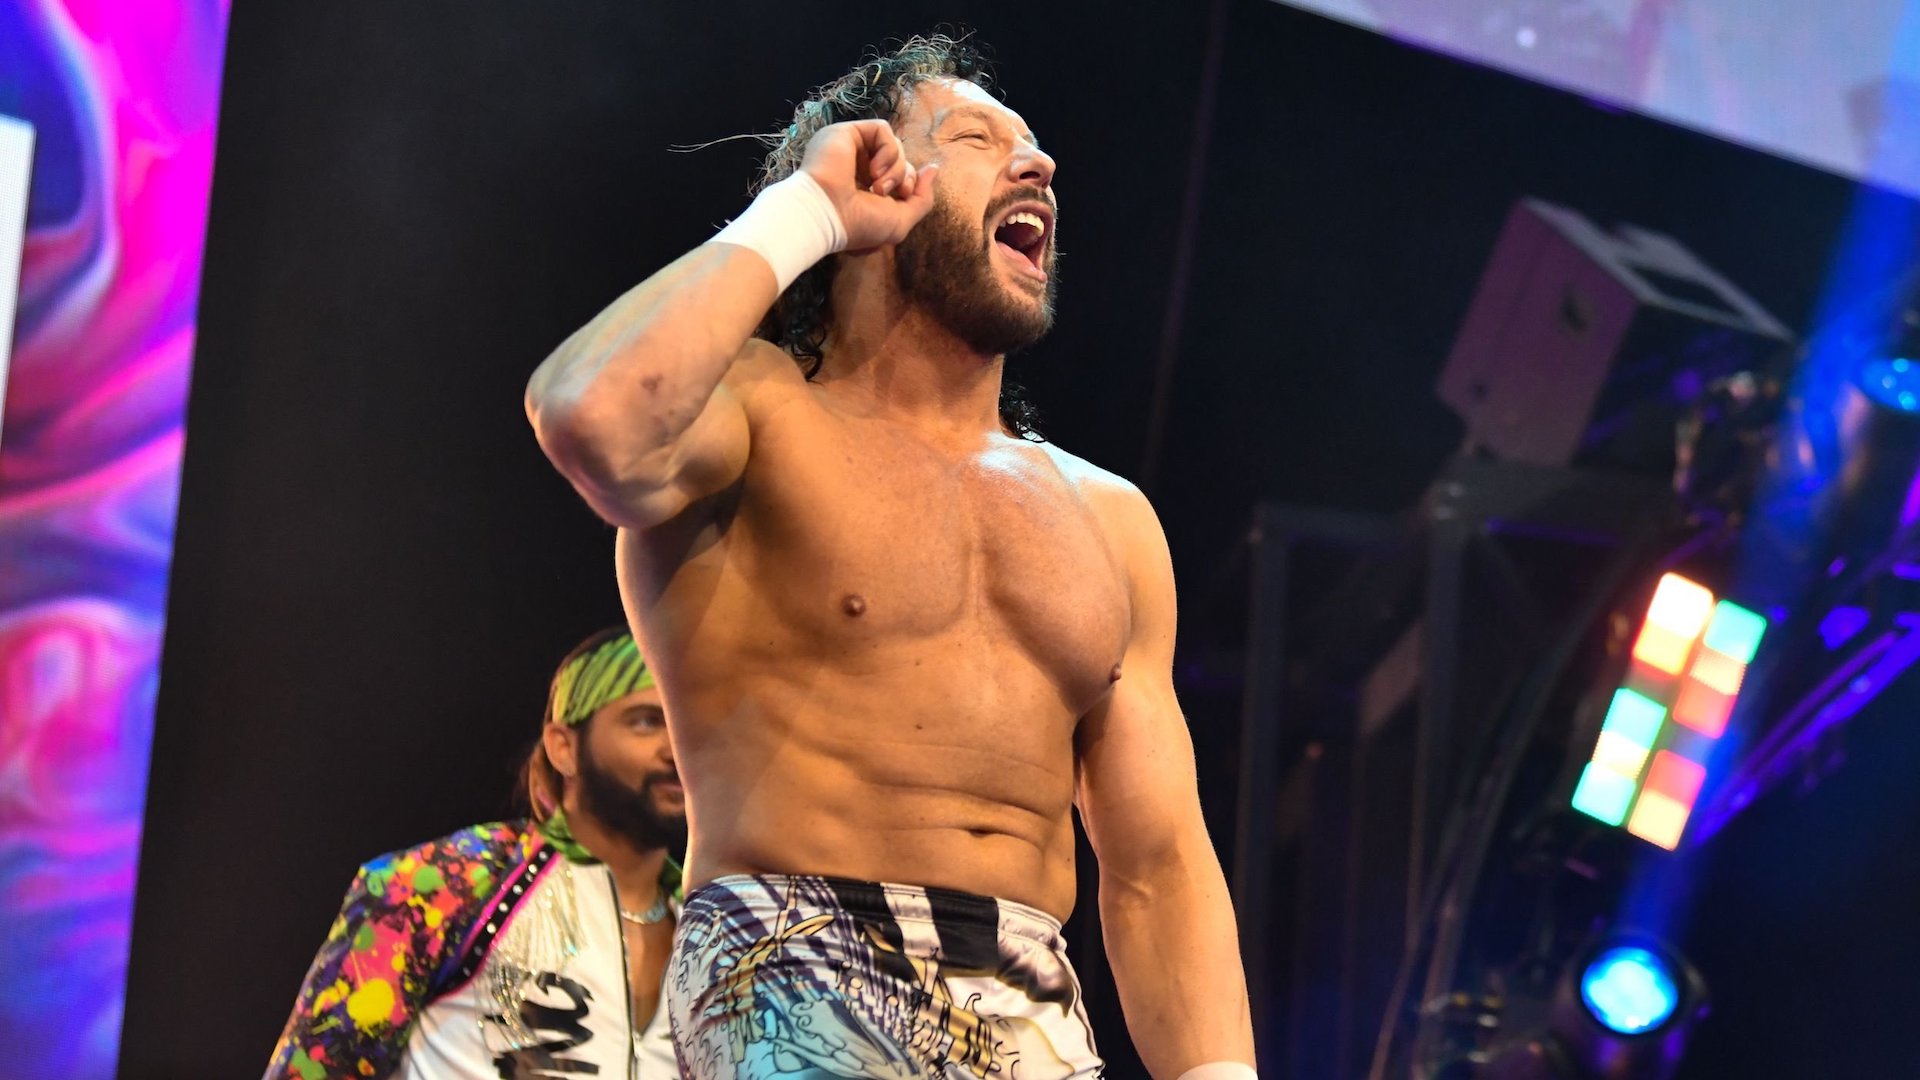 More Details Surrounding AEW's Kenny Omega Being Diagnosed With